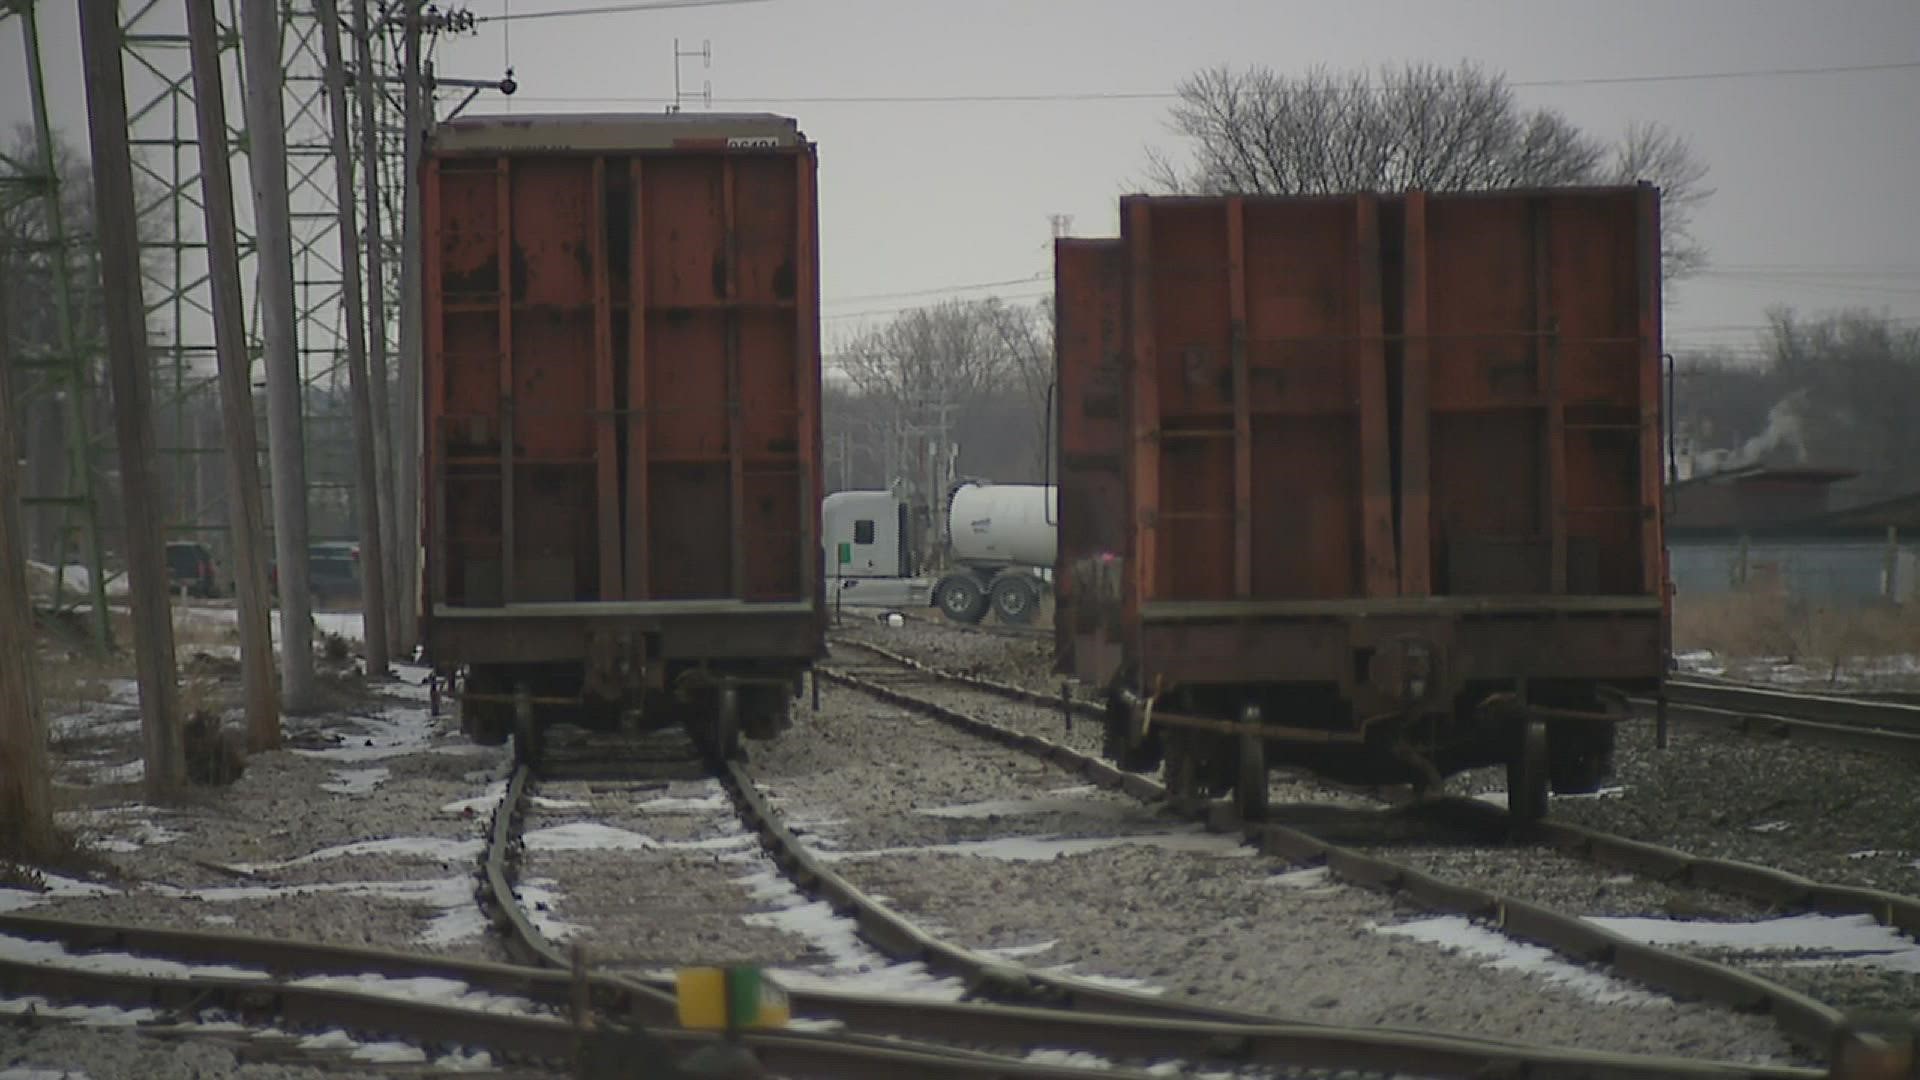 The proposed merger between the Canadian Pacific and Kansas City Southern railways would nearly triple the number of trains rolling through Bettendorf.